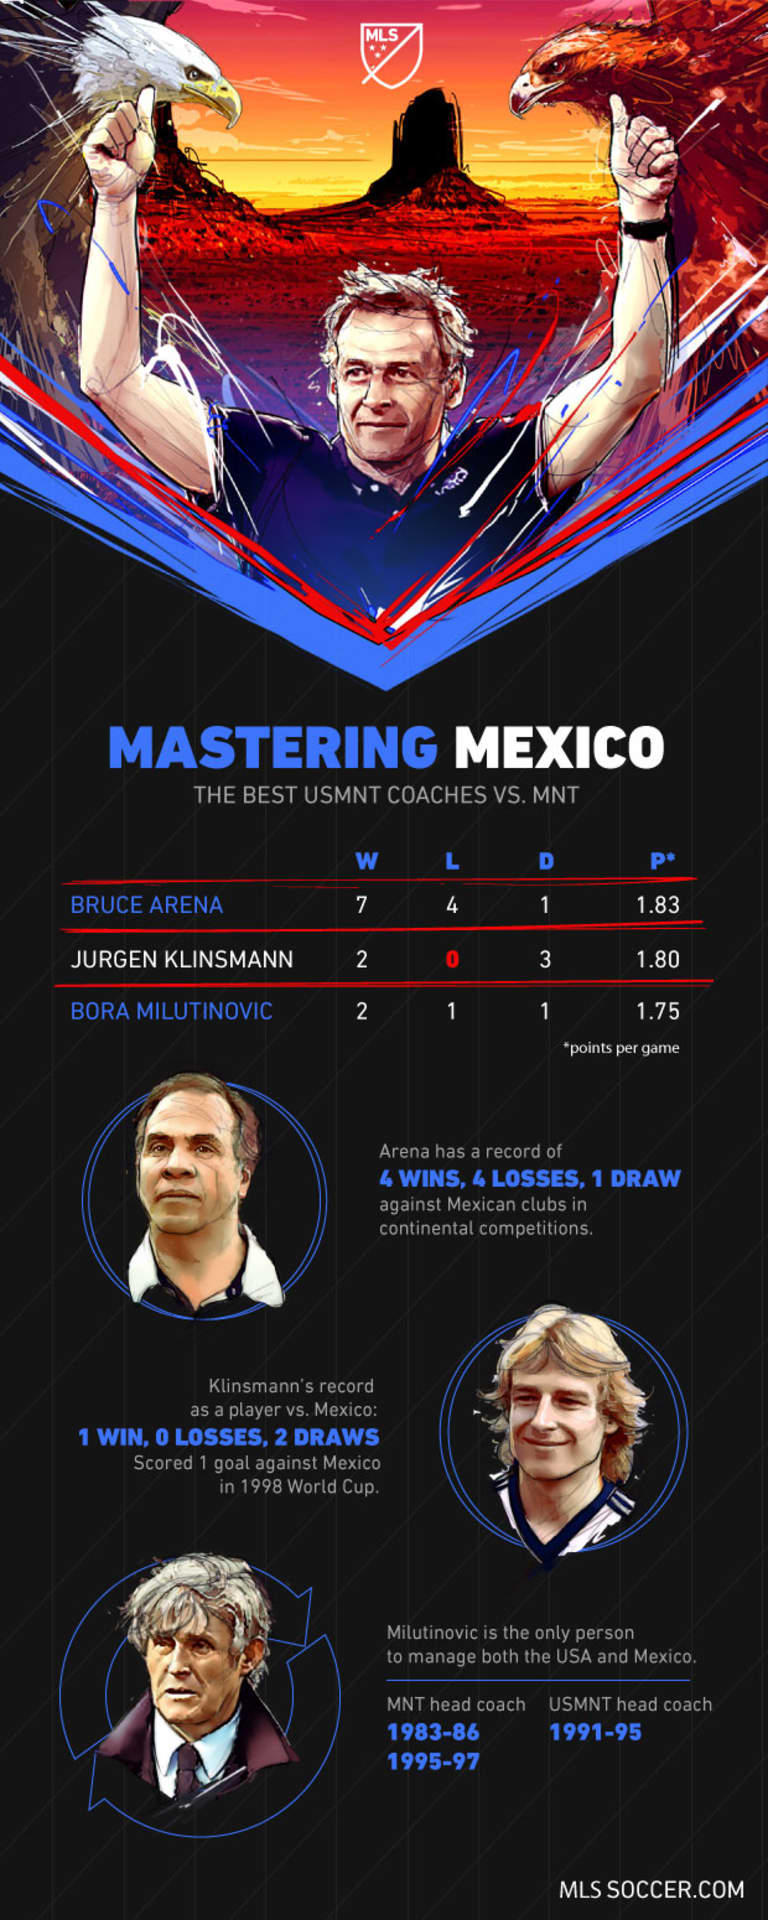 Mastering Mexico: The best USMNT coaches vs. Mexican national team -